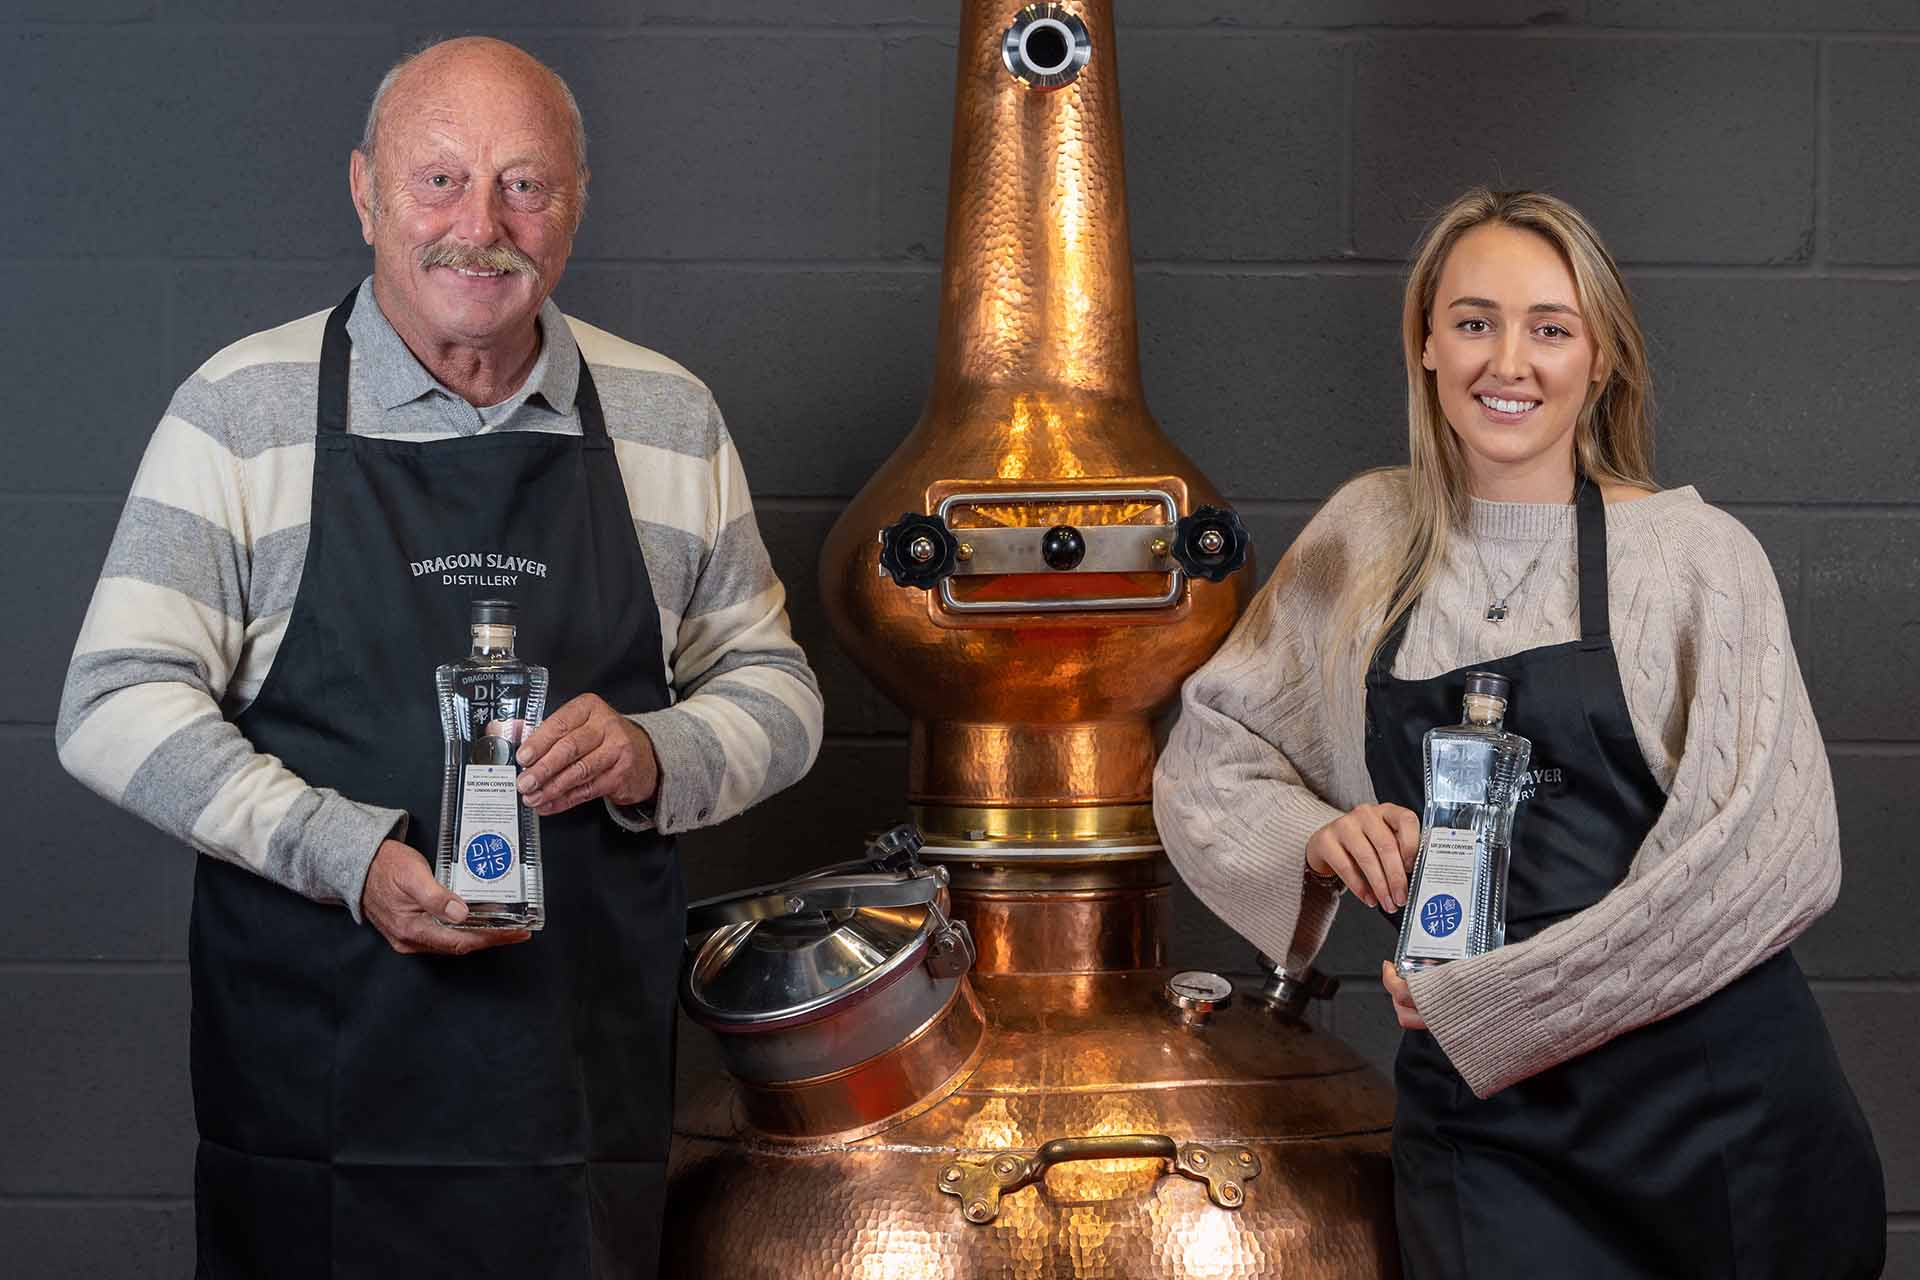 Dragon slayer Distillery founders standing next to gin still